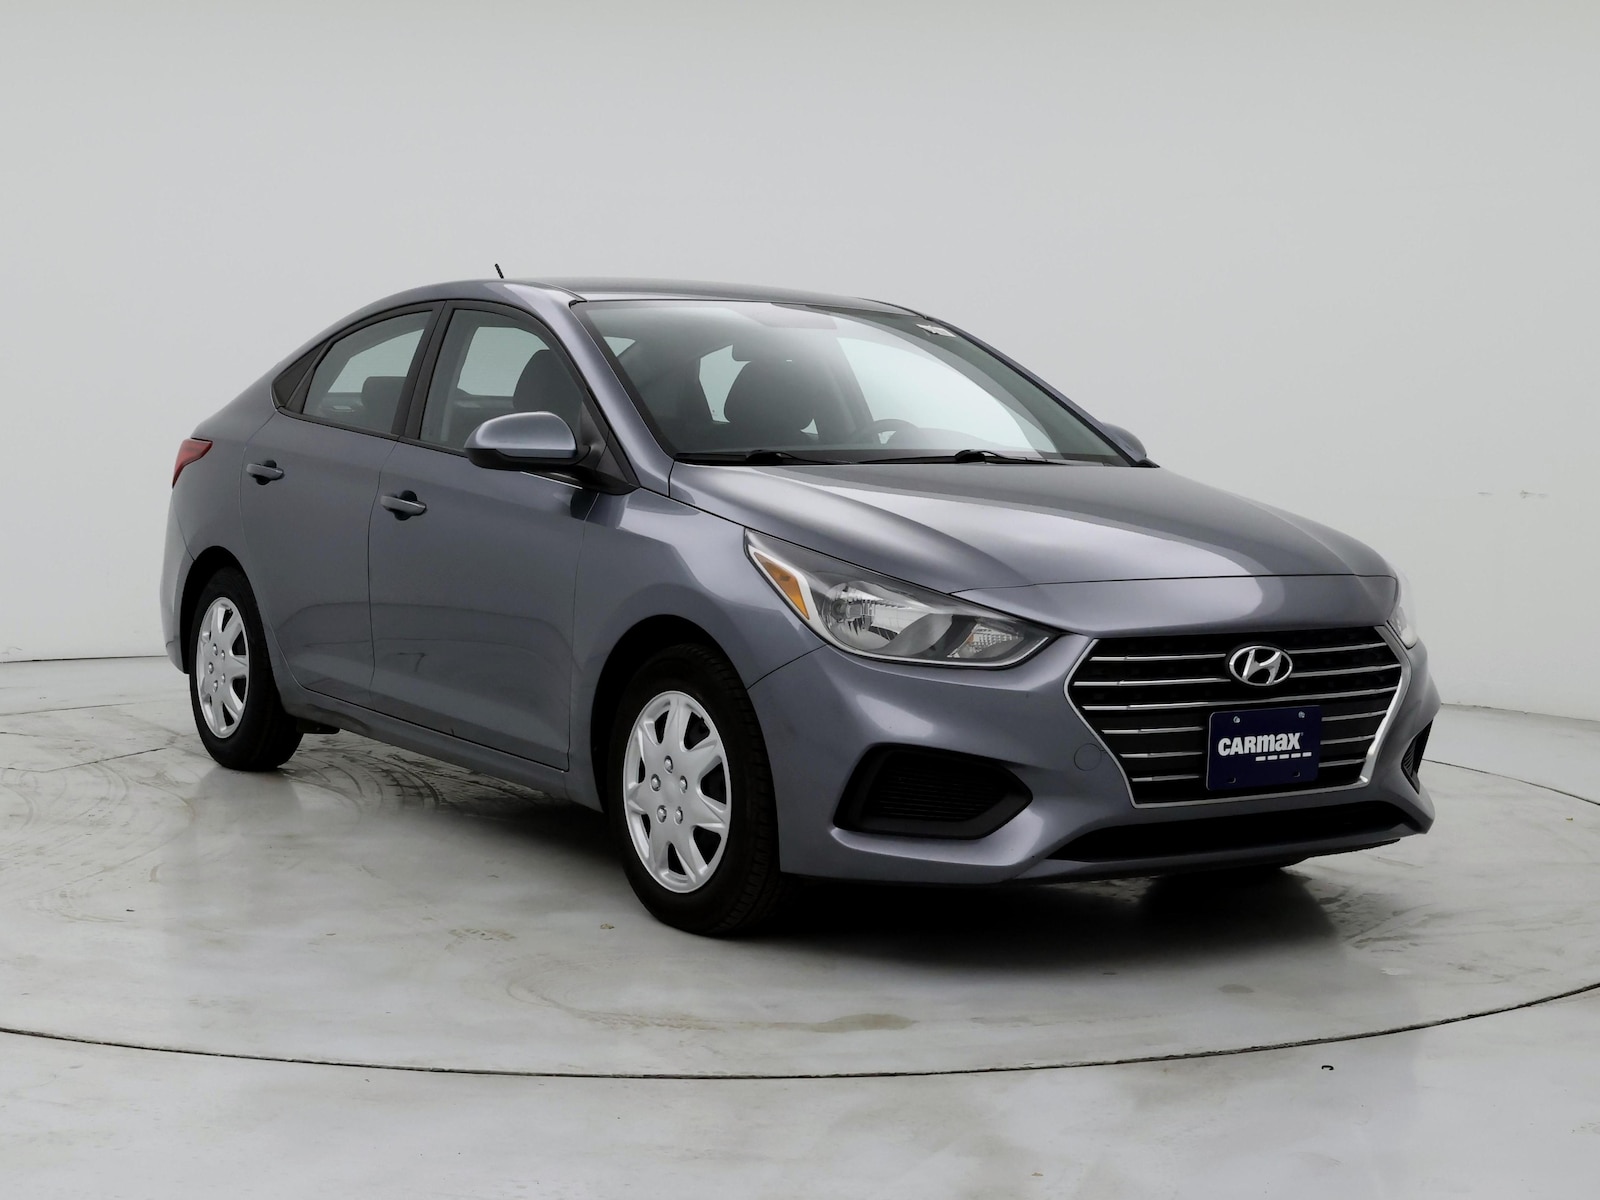 Used 2019 Hyundai Accent SE with VIN 3KPC24A35KE076847 for sale in Spokane Valley, WA